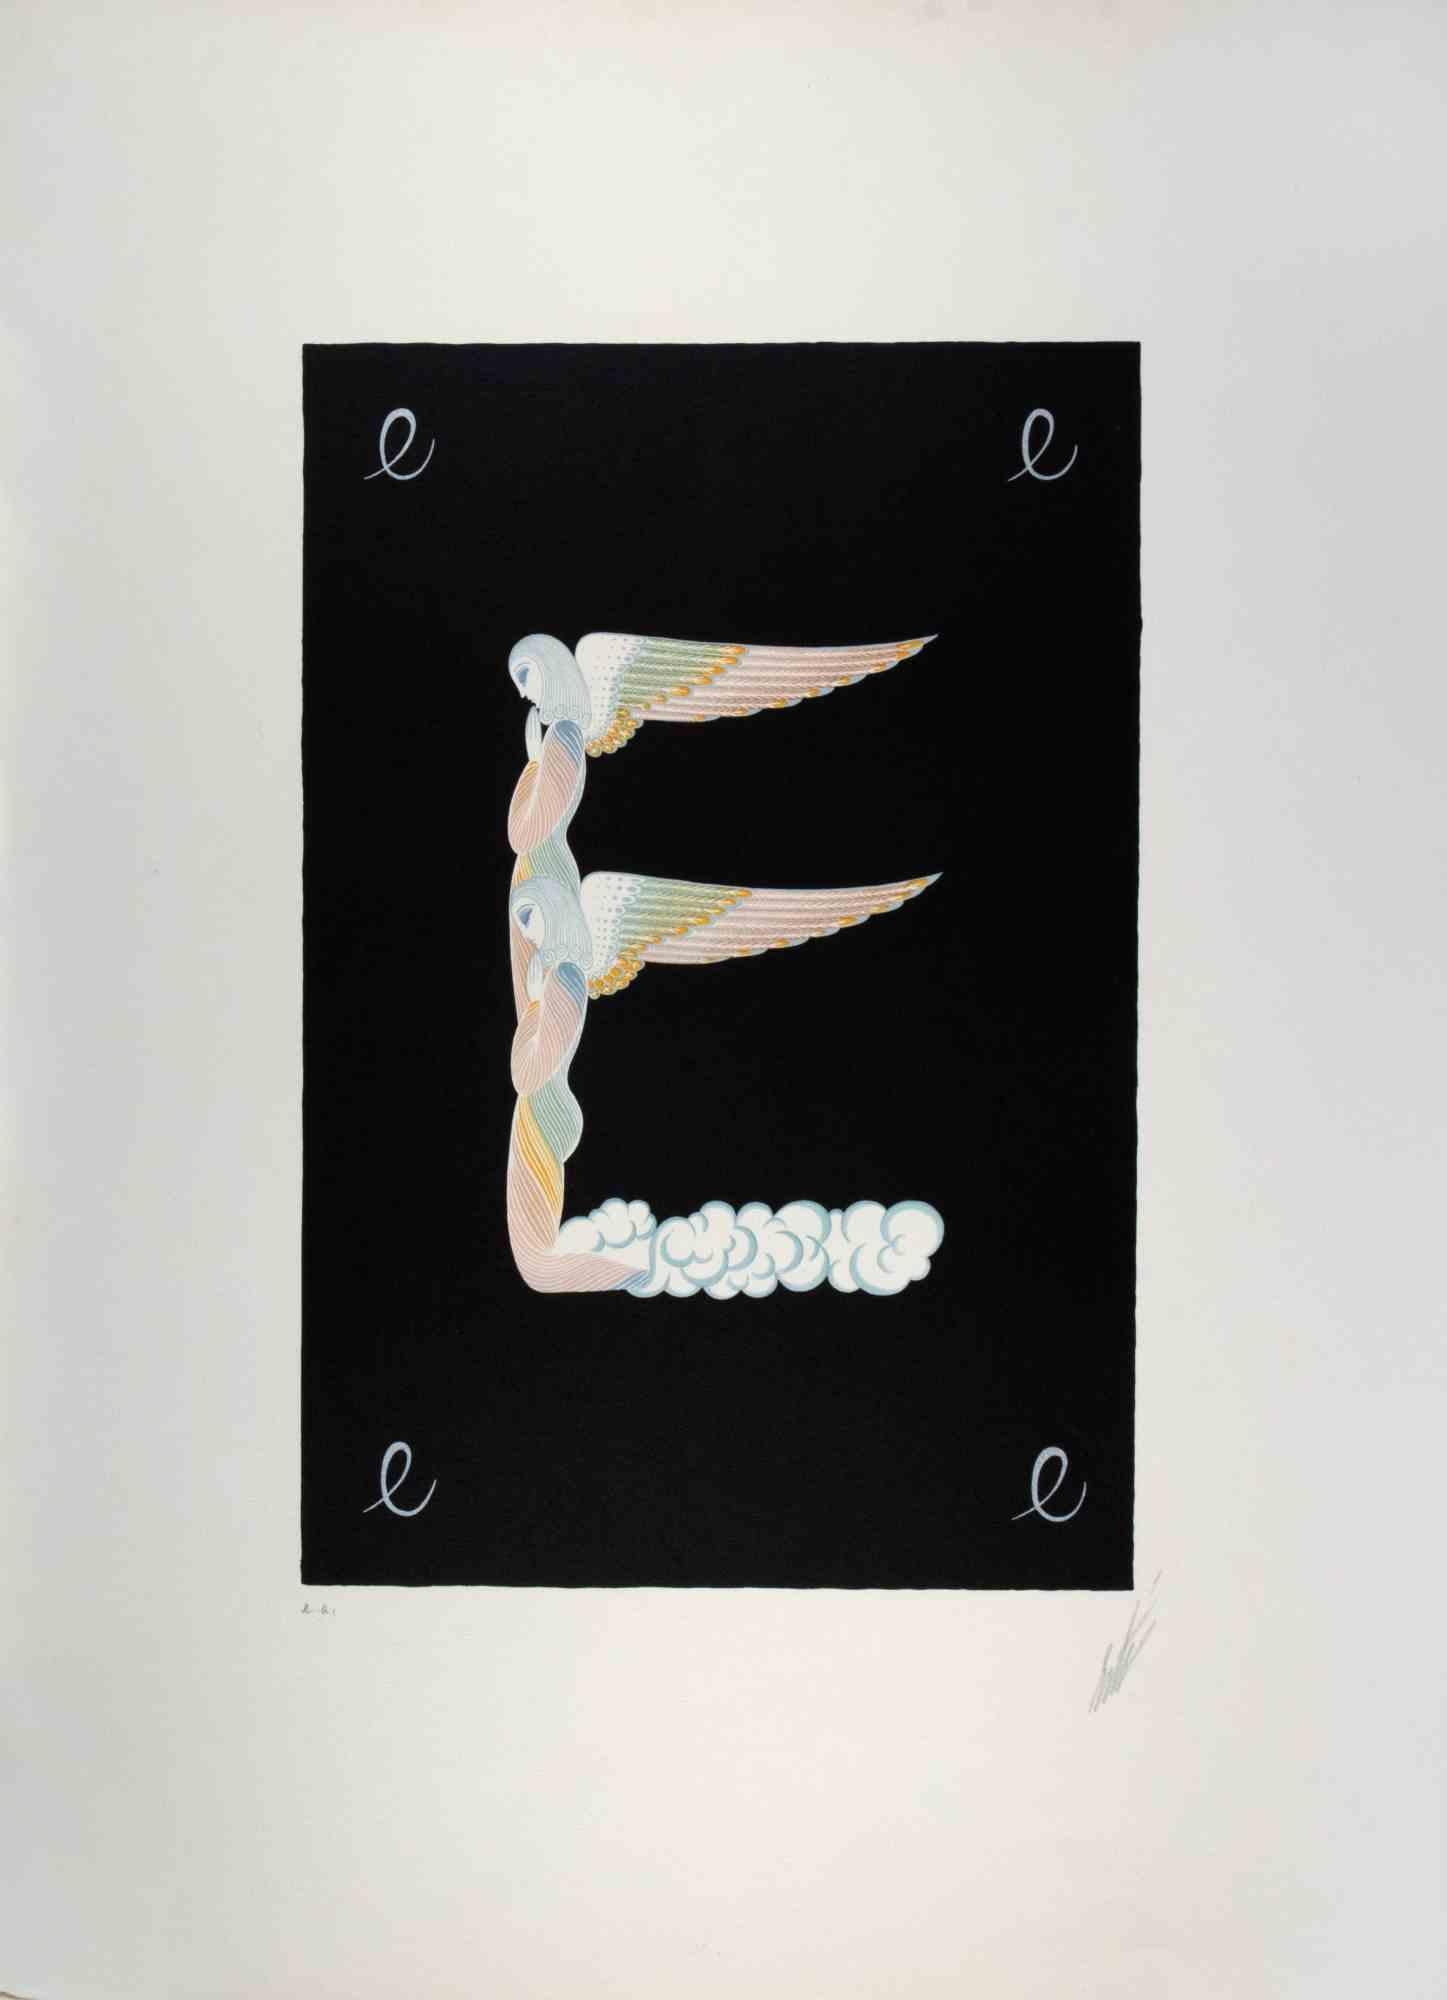 Letter E - from the suite Letters of the Alphabet is a contemporary artwork realized by Erté (Romain de Tirtoff).

Lithograph and Screen Print.

The artwork is from the suite "Letters of the Alphabet", 1976.

Hand signed on the lower margin. Artist